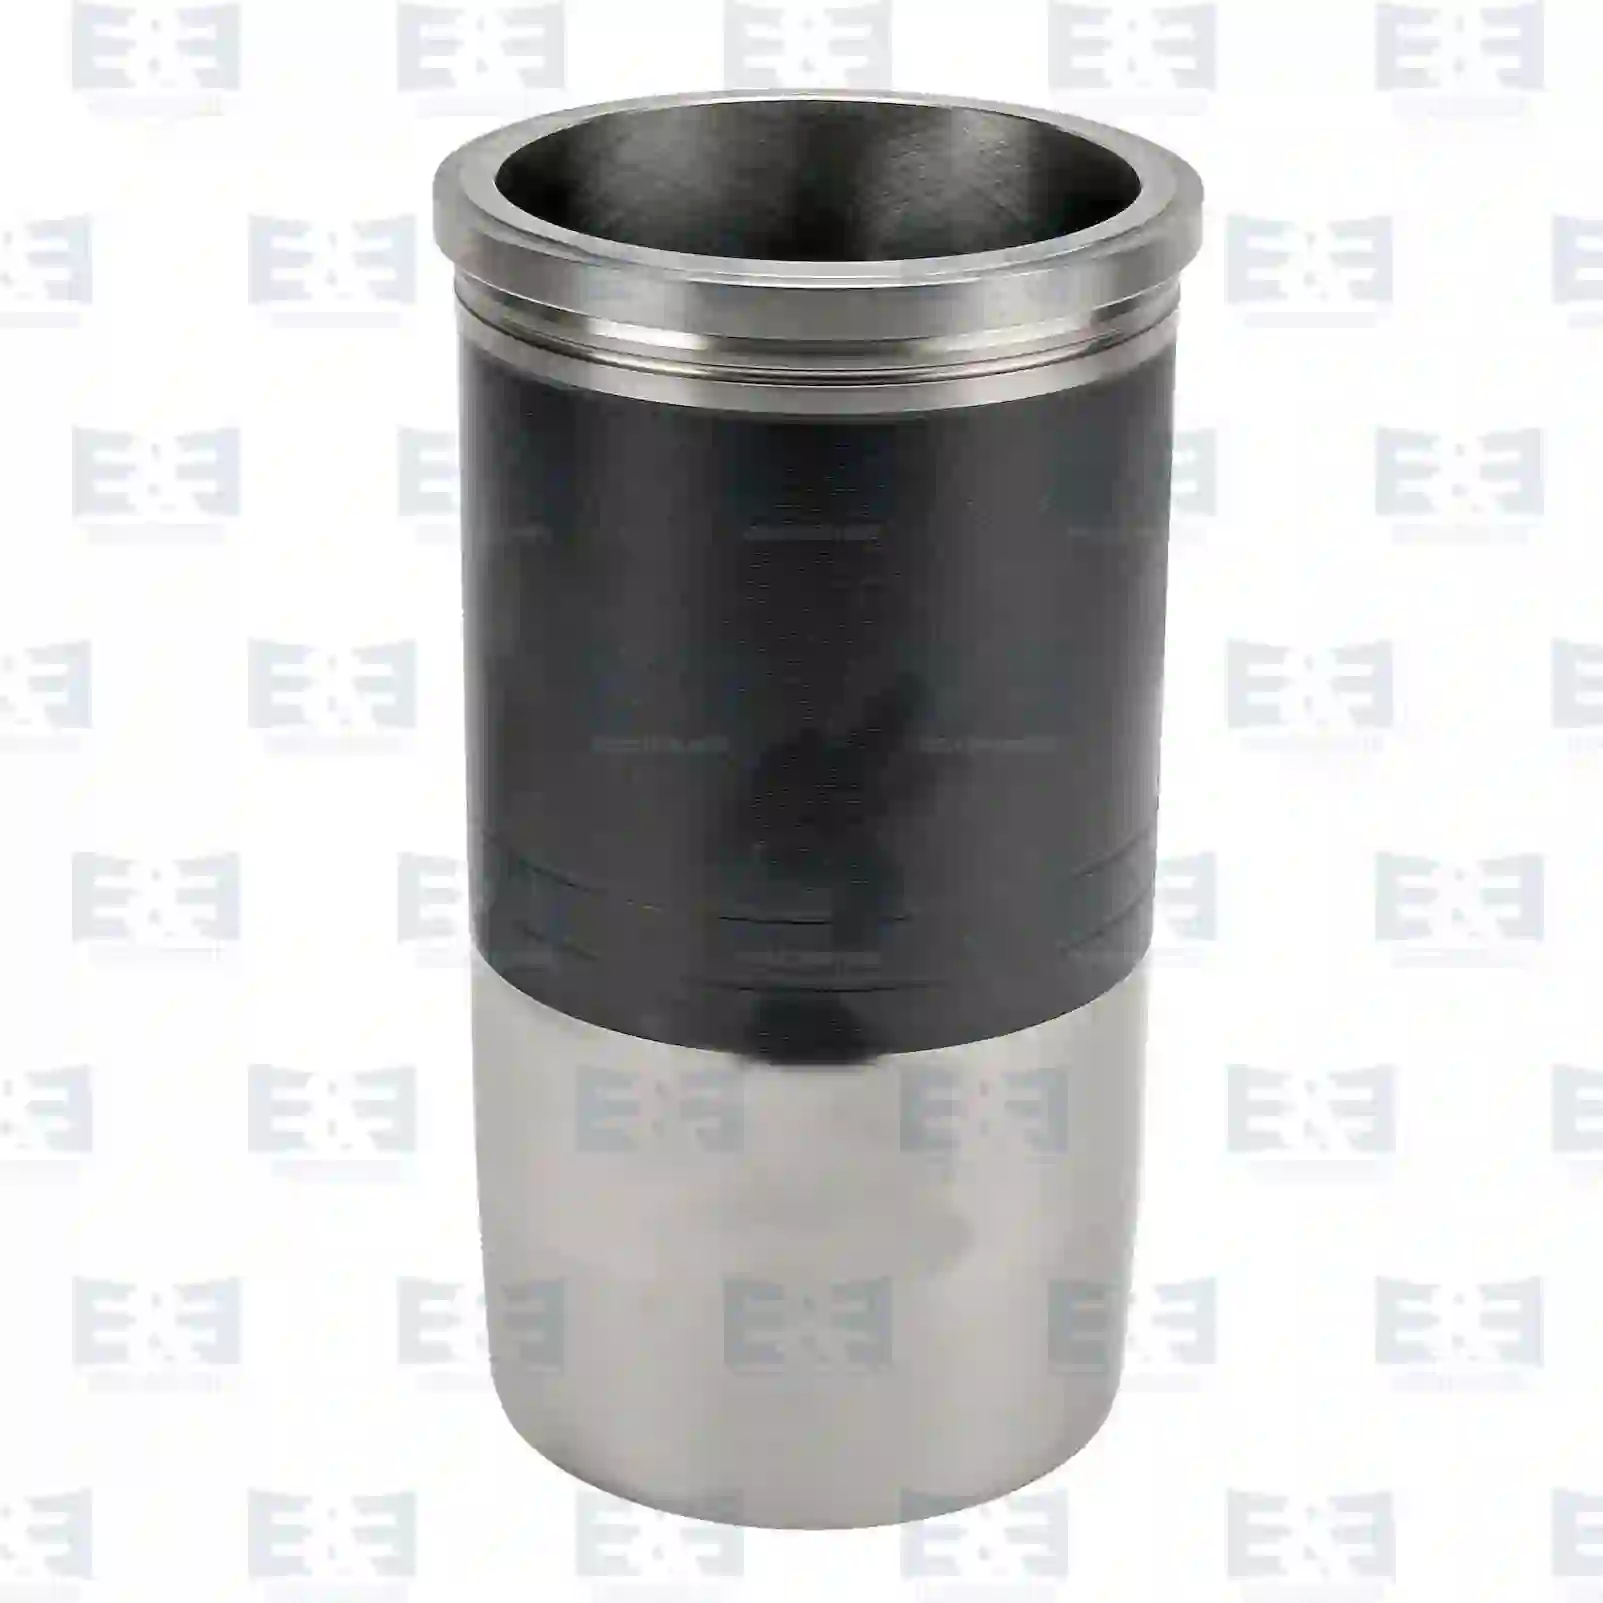 Cylinder liner, without seal rings, 2E2207035, 51012010326 ||  2E2207035 E&E Truck Spare Parts | Truck Spare Parts, Auotomotive Spare Parts Cylinder liner, without seal rings, 2E2207035, 51012010326 ||  2E2207035 E&E Truck Spare Parts | Truck Spare Parts, Auotomotive Spare Parts